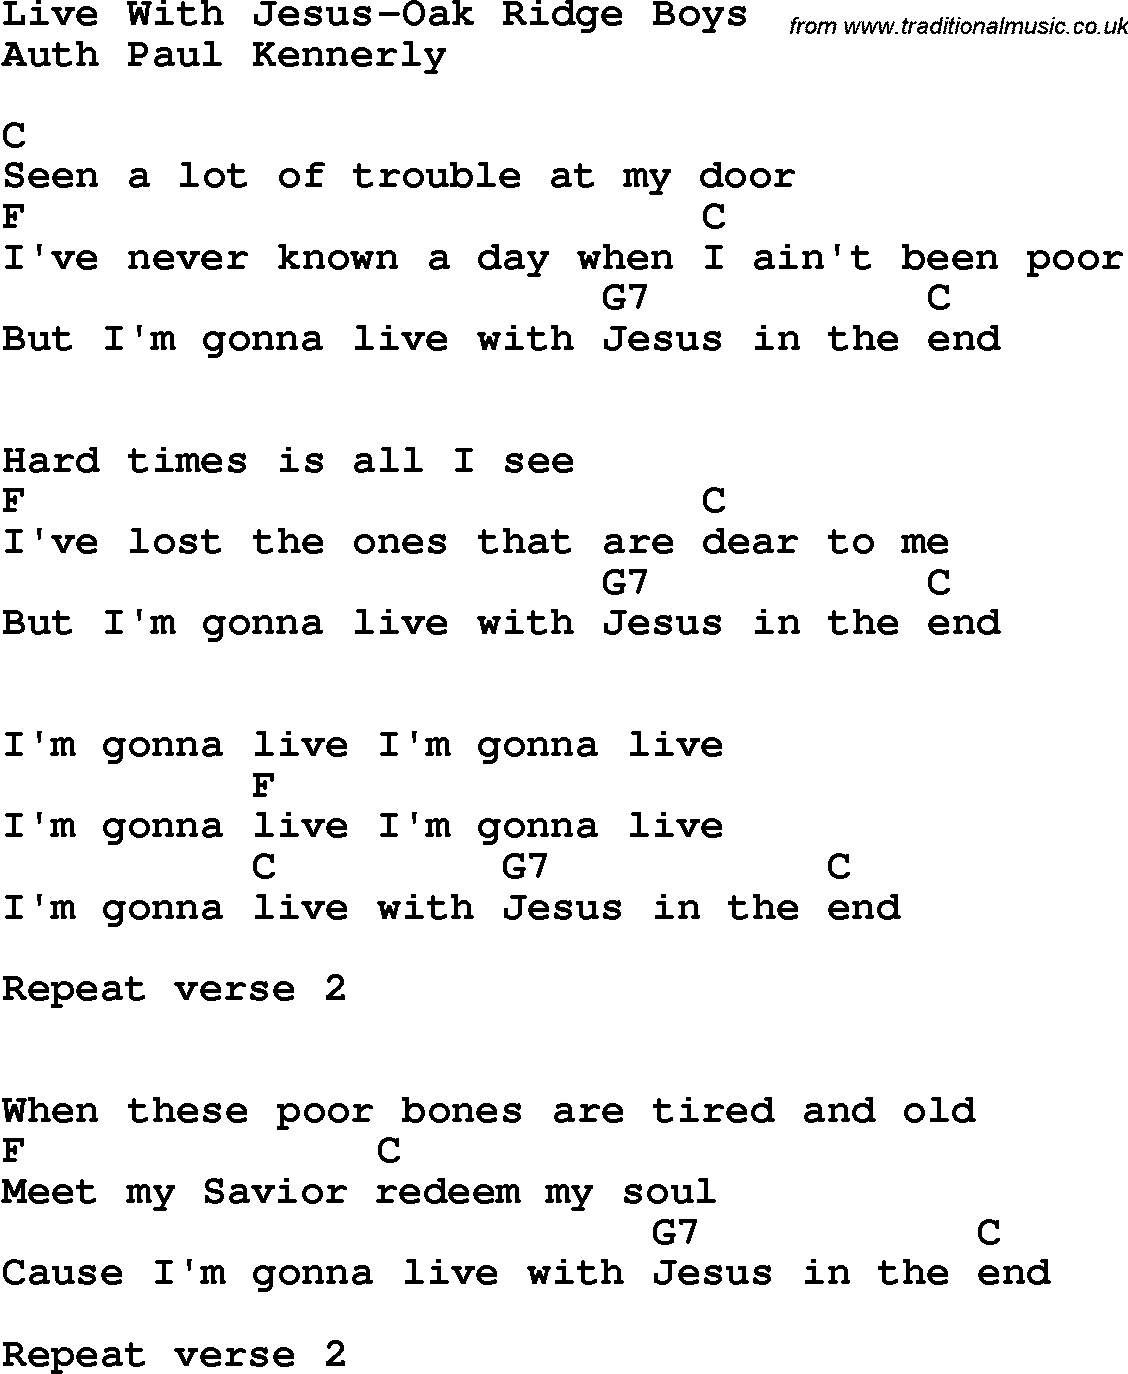 Country, Southern and Bluegrass Gospel Song Live With Jesus-Oak Ridge Boys lyrics and chords